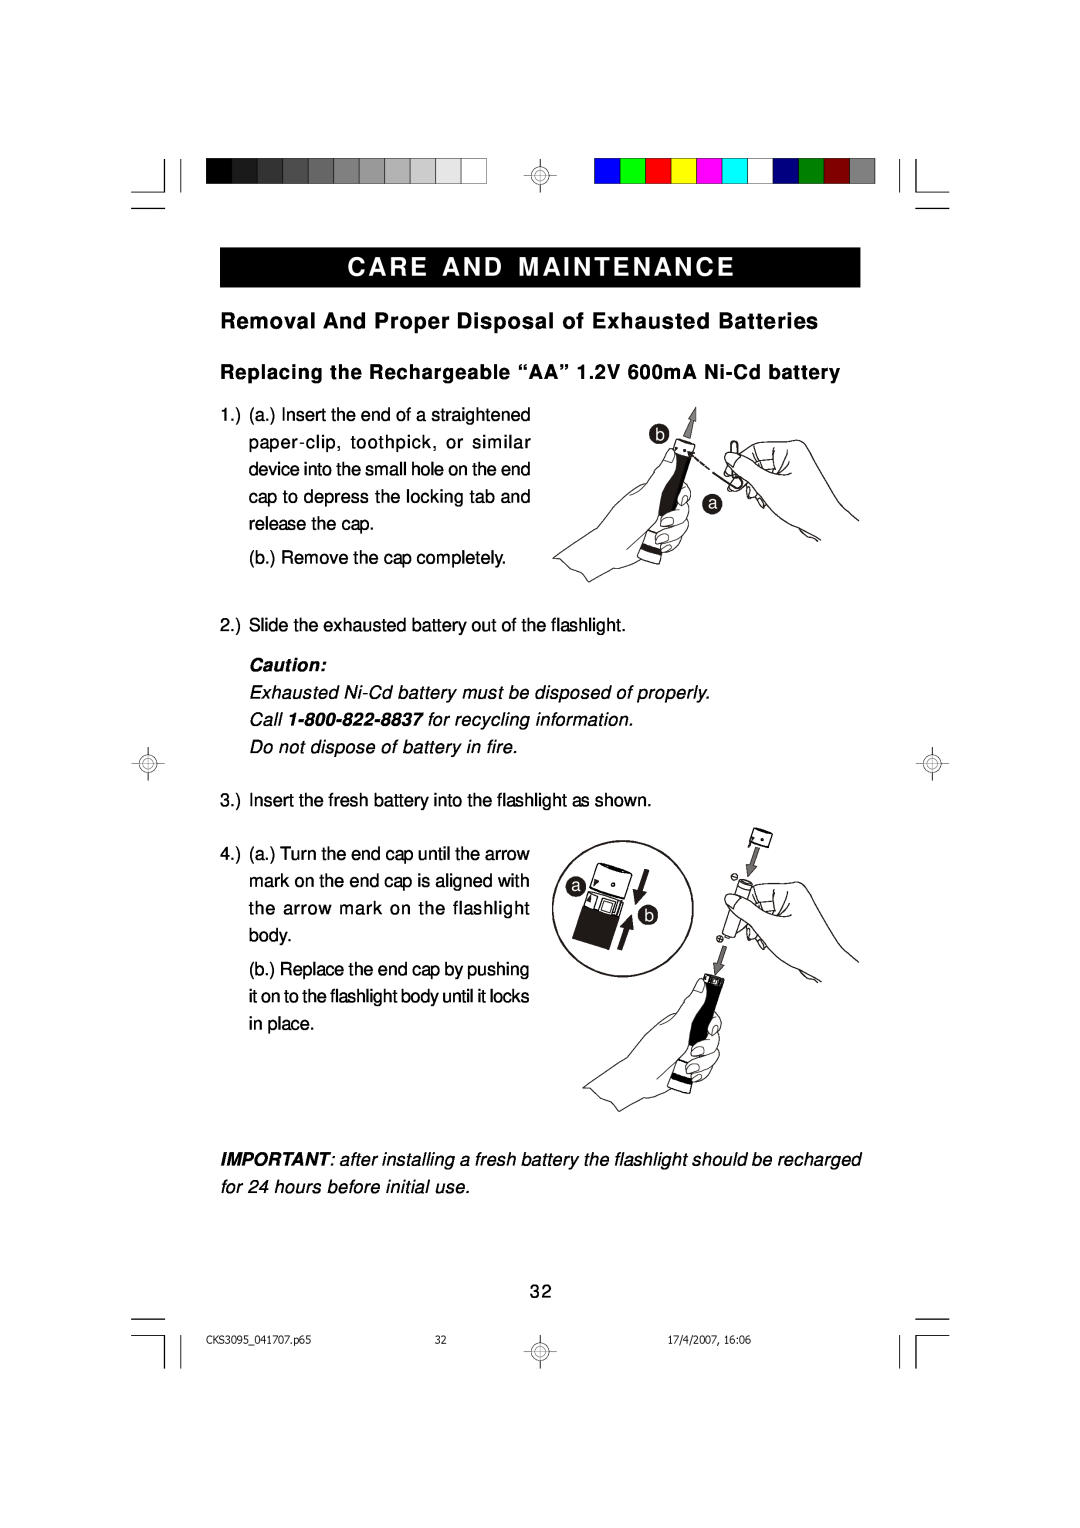 Emerson CKS3095B, CKS3095S owner manual Care And M Aintenance, Removal And Proper Disposal of Exhausted Batteries 